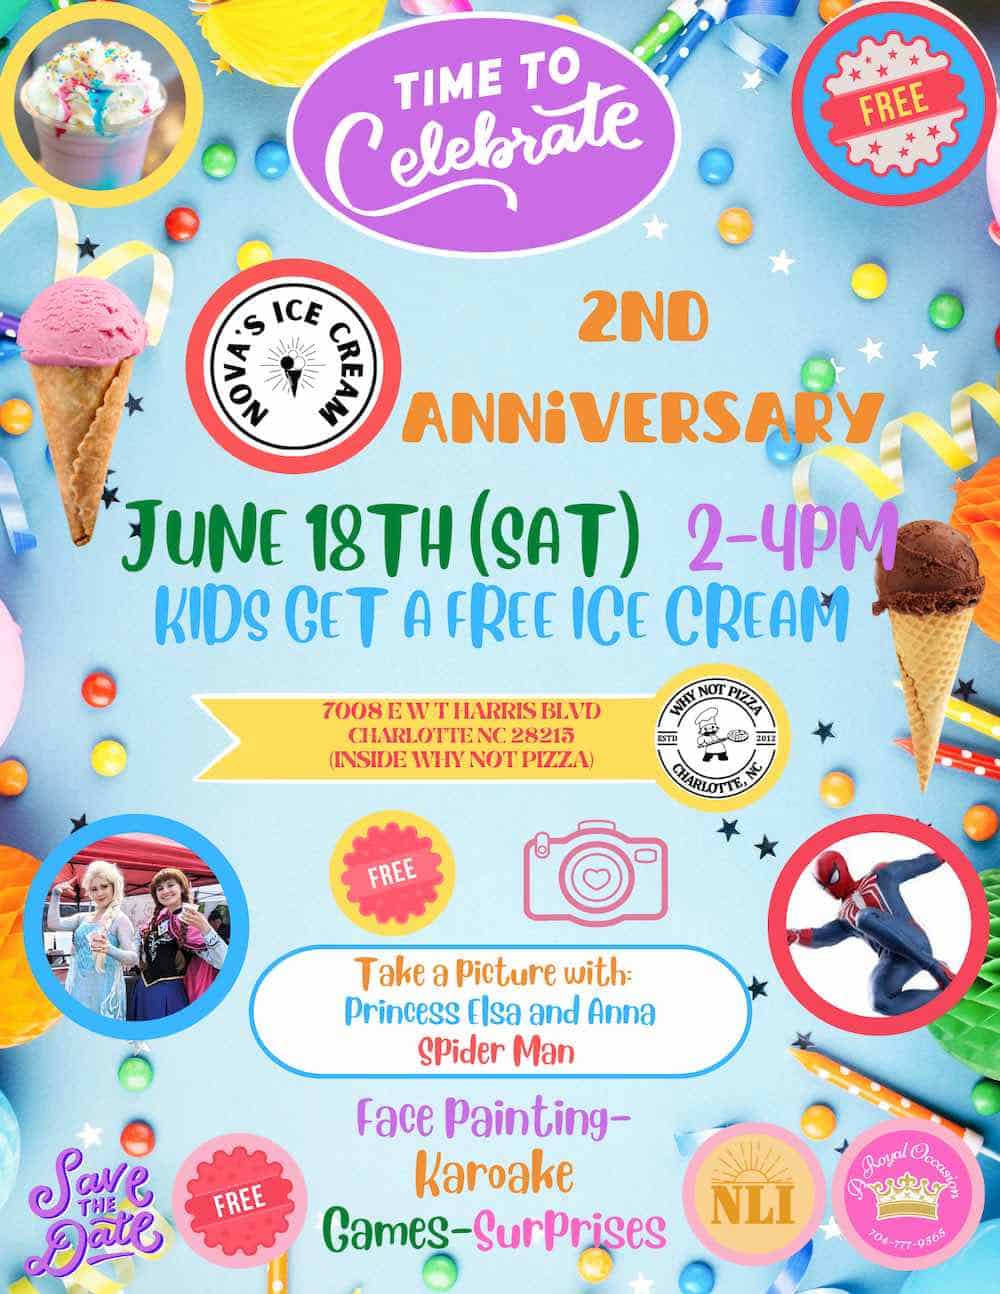 Why Not Pizza's Birthday: Free ice cream for kids, plus photo ops ...